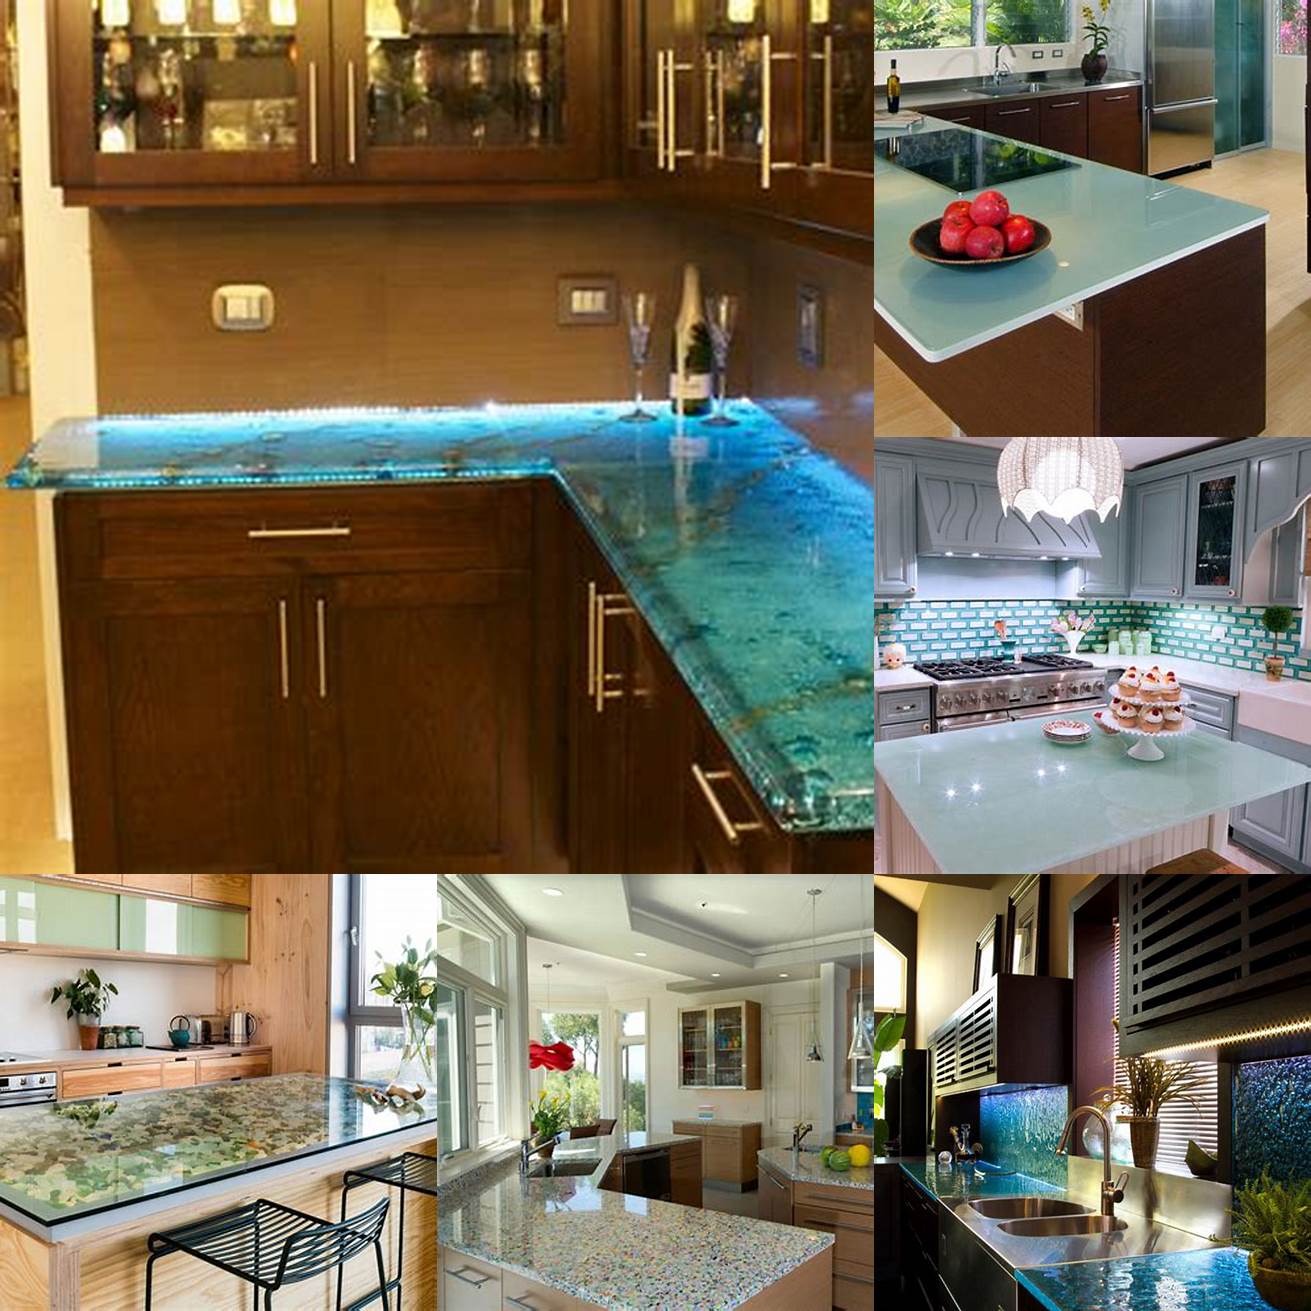 A glass countertop adds a touch of luxury and reflects light making the room feel brighter and more spacious